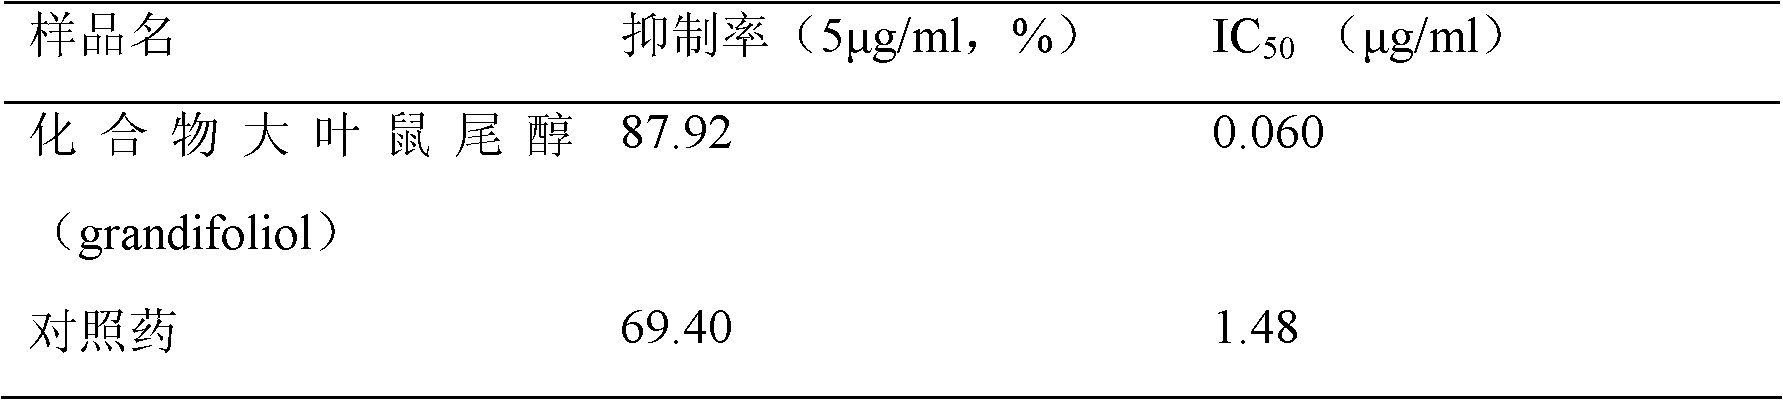 Compound grandifoliol, its preparation method and its application